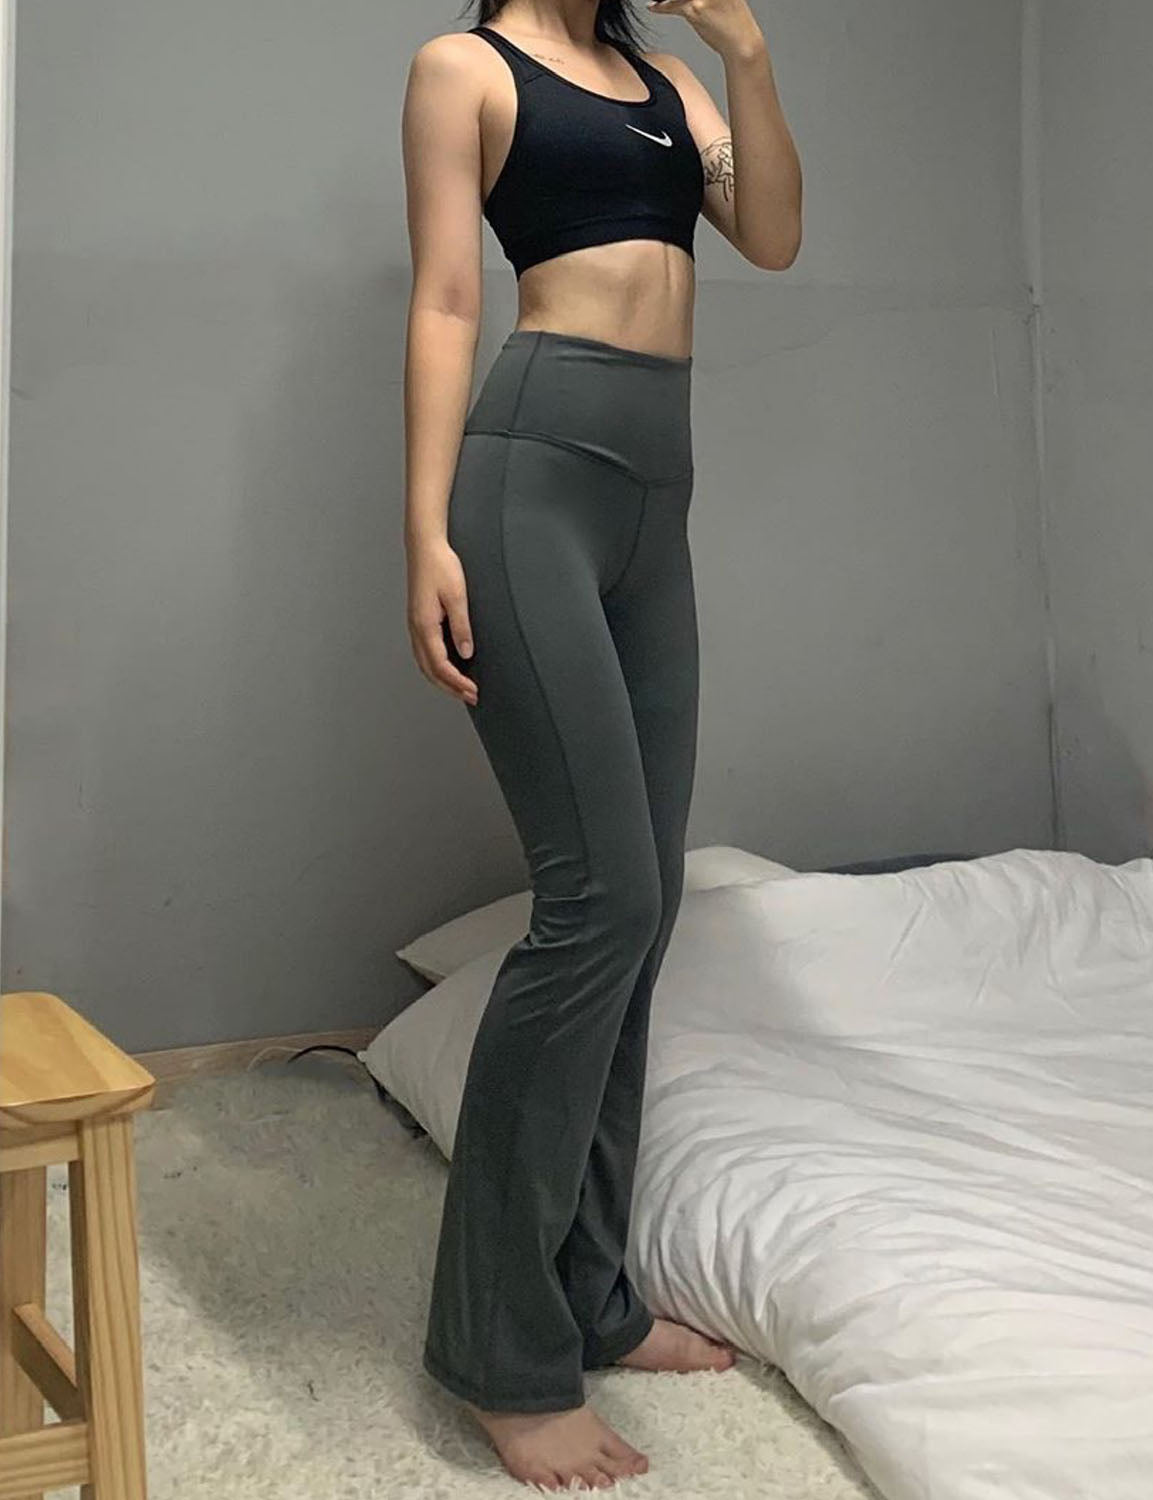 High Waist Bootcut Leggings Shadowcharcoal 75%Nylon/25%Spandex Fabric doesn't attract lint easily 4-way stretch No see-through Moisture-wicking Tummy control Inner pocket Five lengths